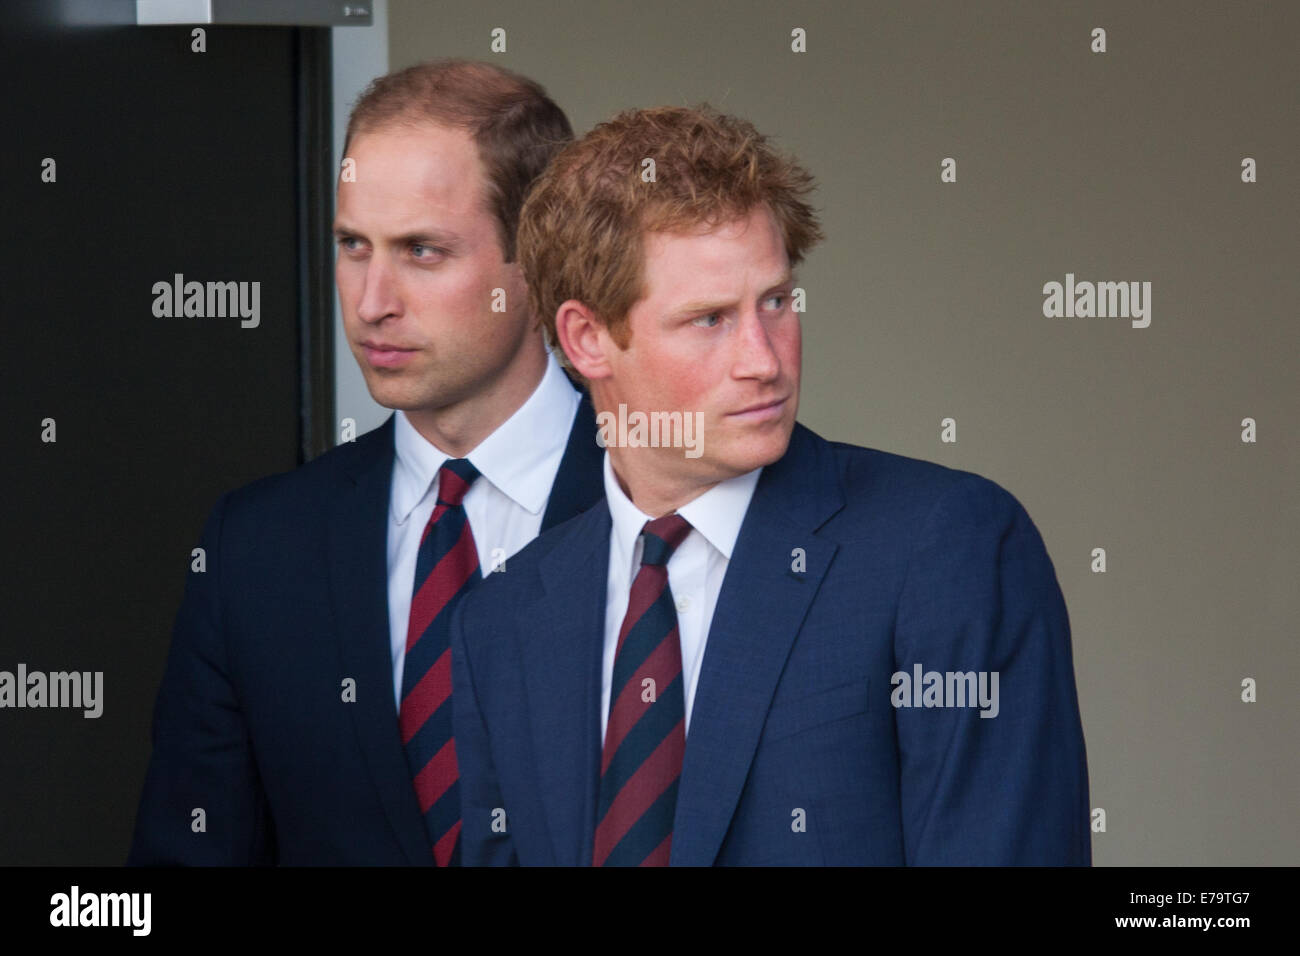 Queen Elizabeth Olympic Park, London, UK. 10th Sep, 2014. Prince William and Prince Harry await the arrival of their father HRH Prince Charles ahead of the opening ceremony for the Invictus Games, where over 400 competitors from 13 nations will take part in an international sporting event for wounded, injured and sick Servicemen and women. Credit:  Paul Davey/Alamy Live News Stock Photo